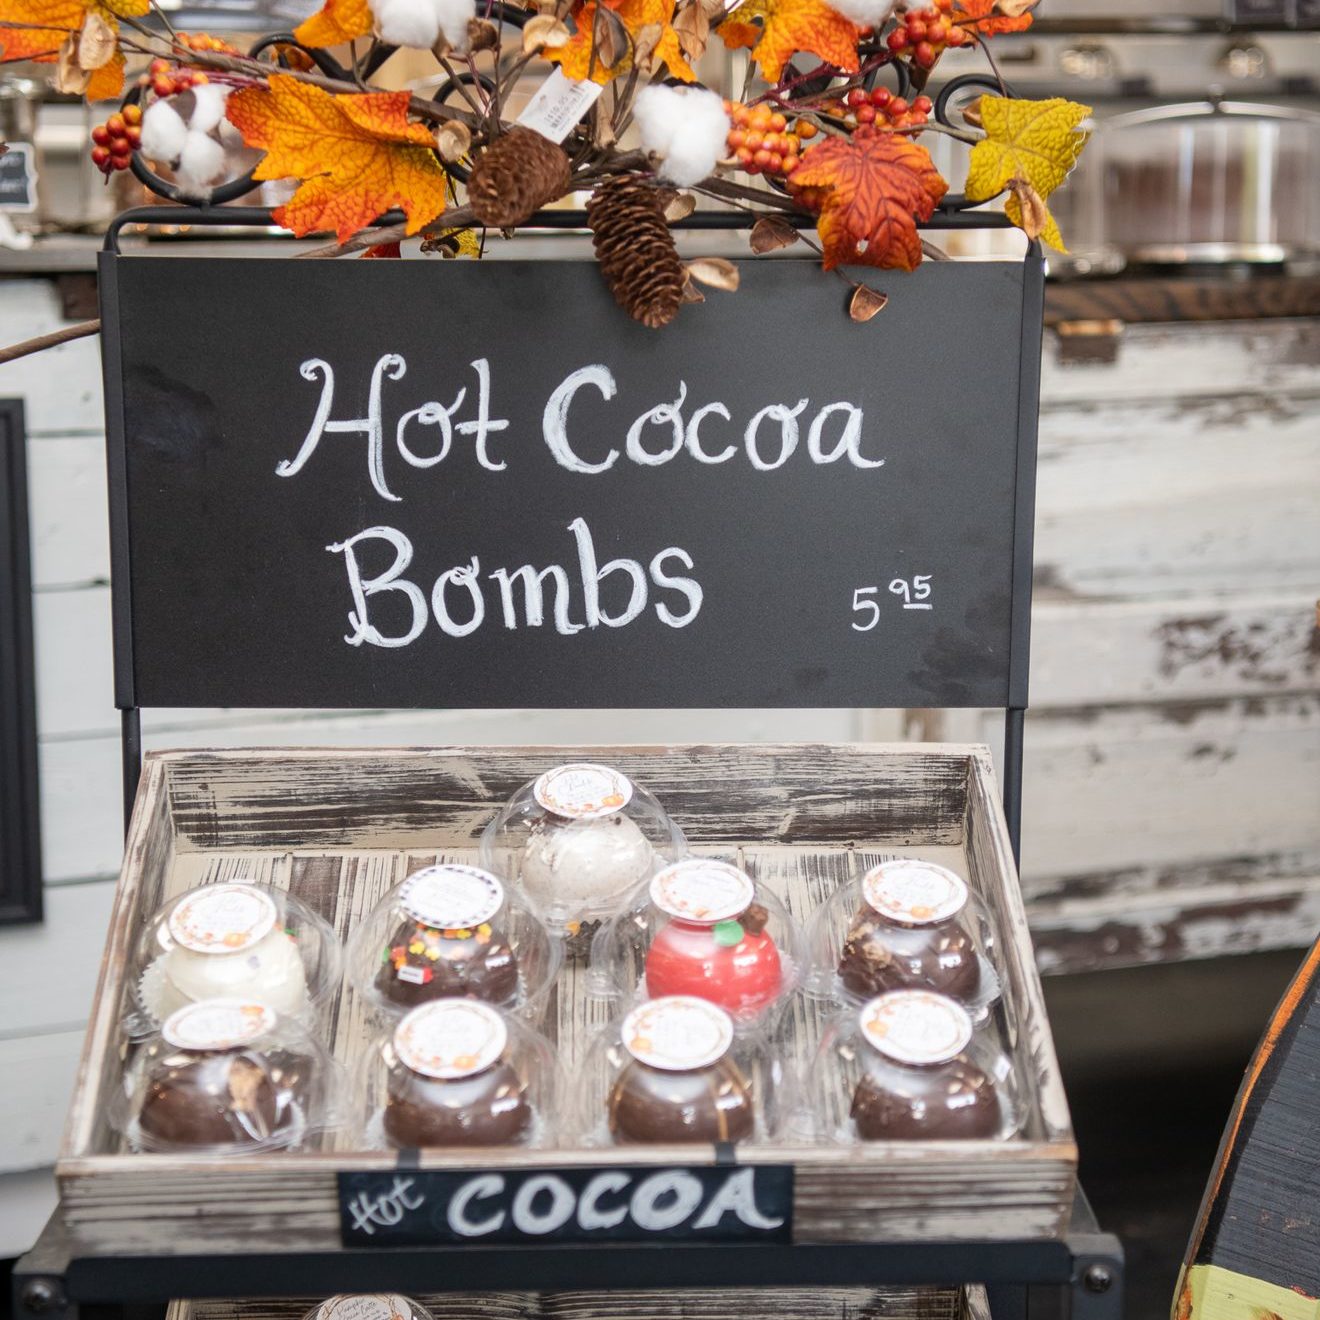 Hot cocoa bombs at The Market in High Point, NC.